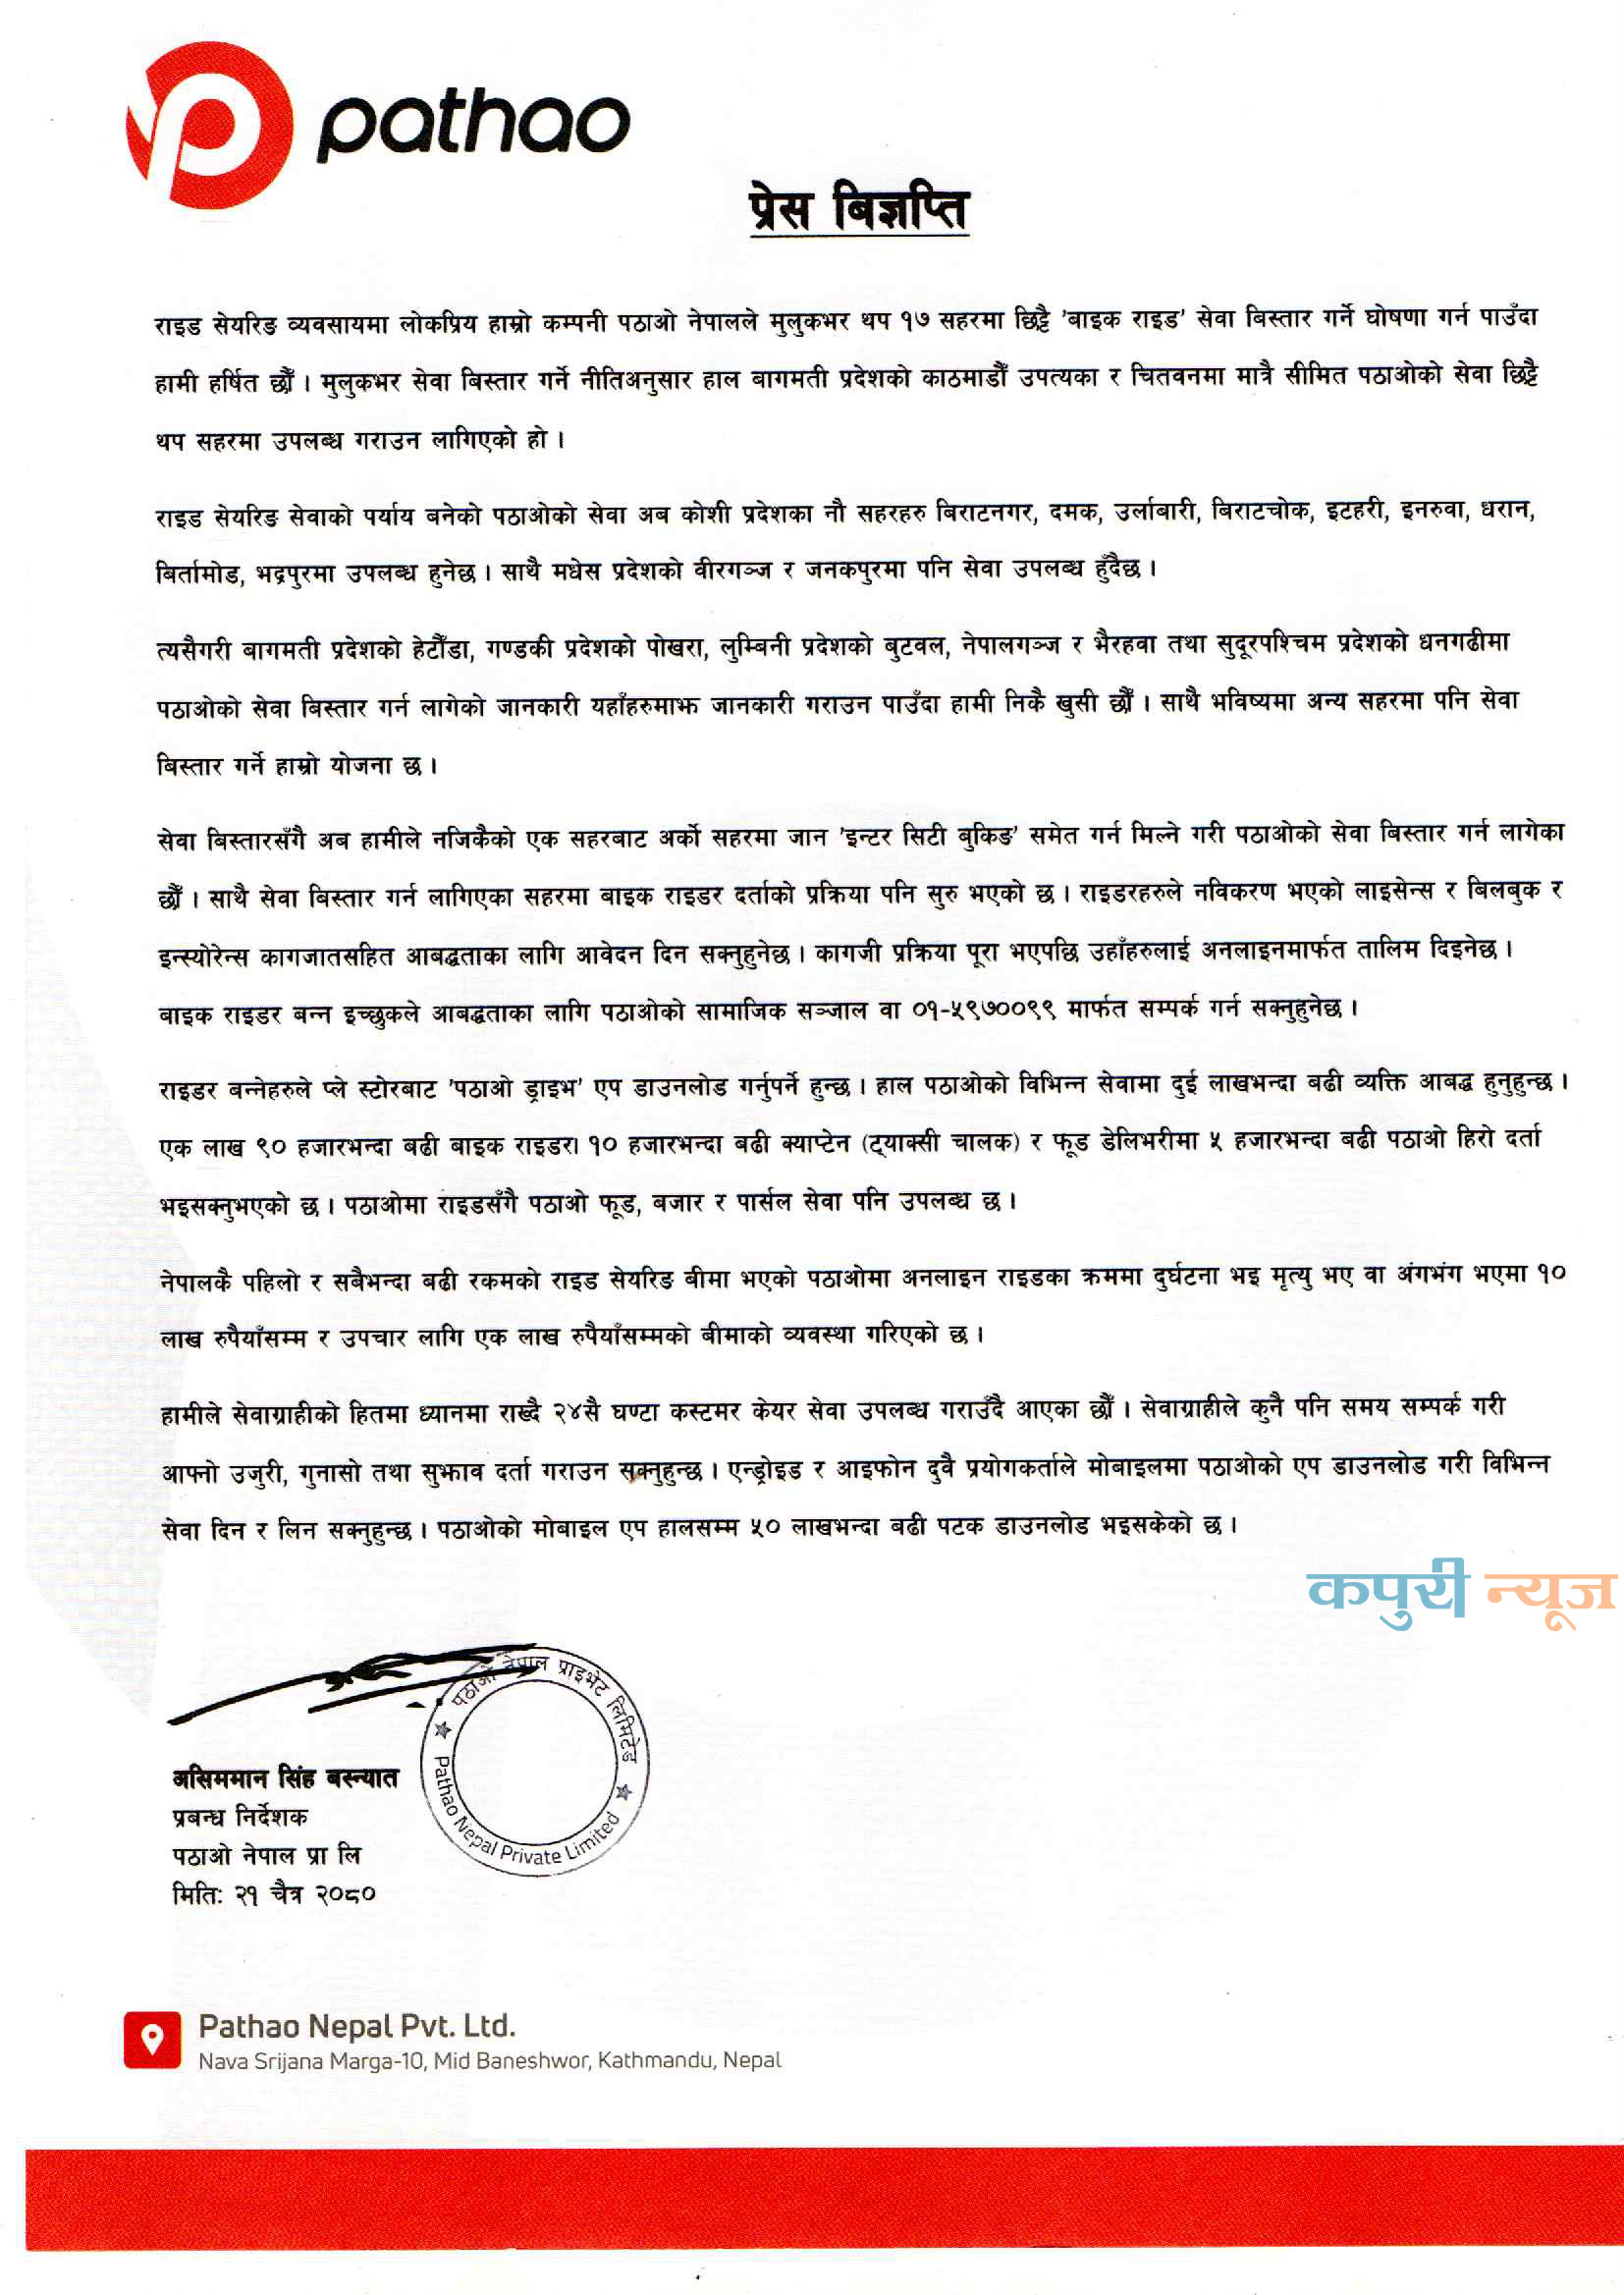 pathao press release